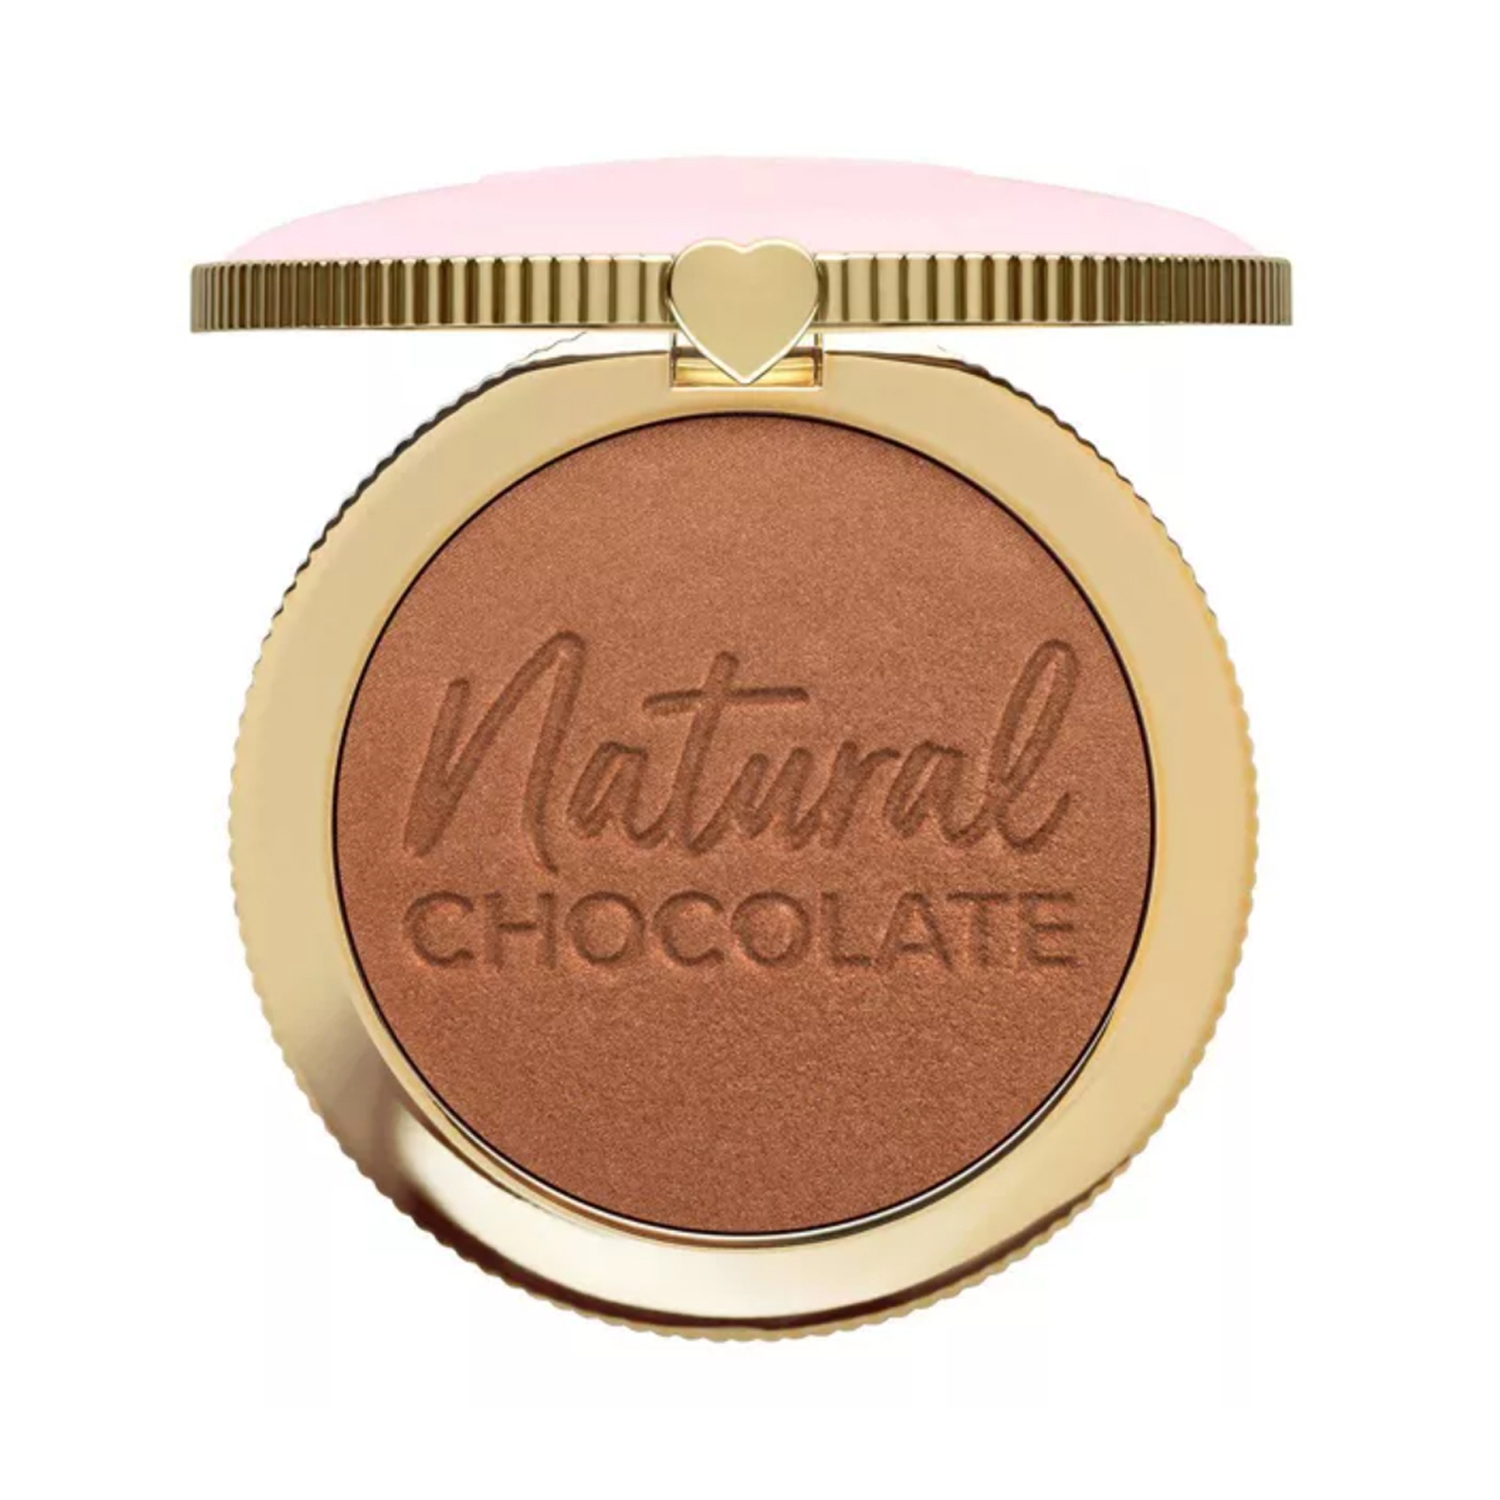 Too Faced | Too Faced Chocolate Soleil Natural Chocolate Bronzer - Golden Cocoa (9g)